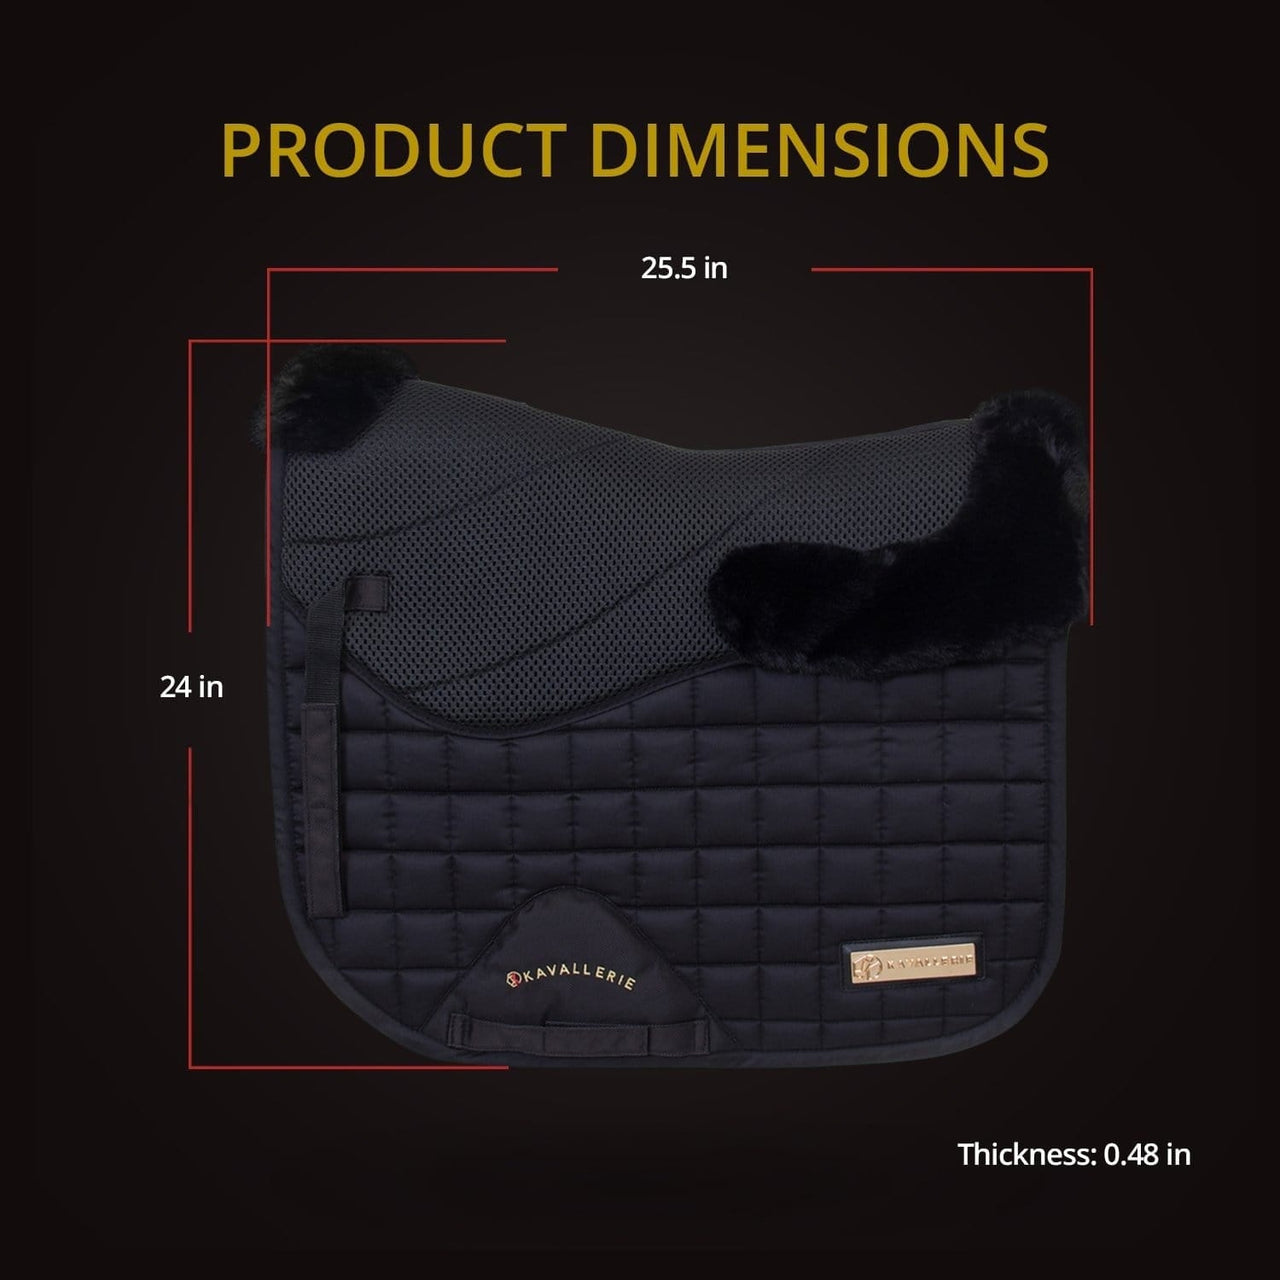 Full 3D Mesh with Fur Saddle Pad - Kavallerie